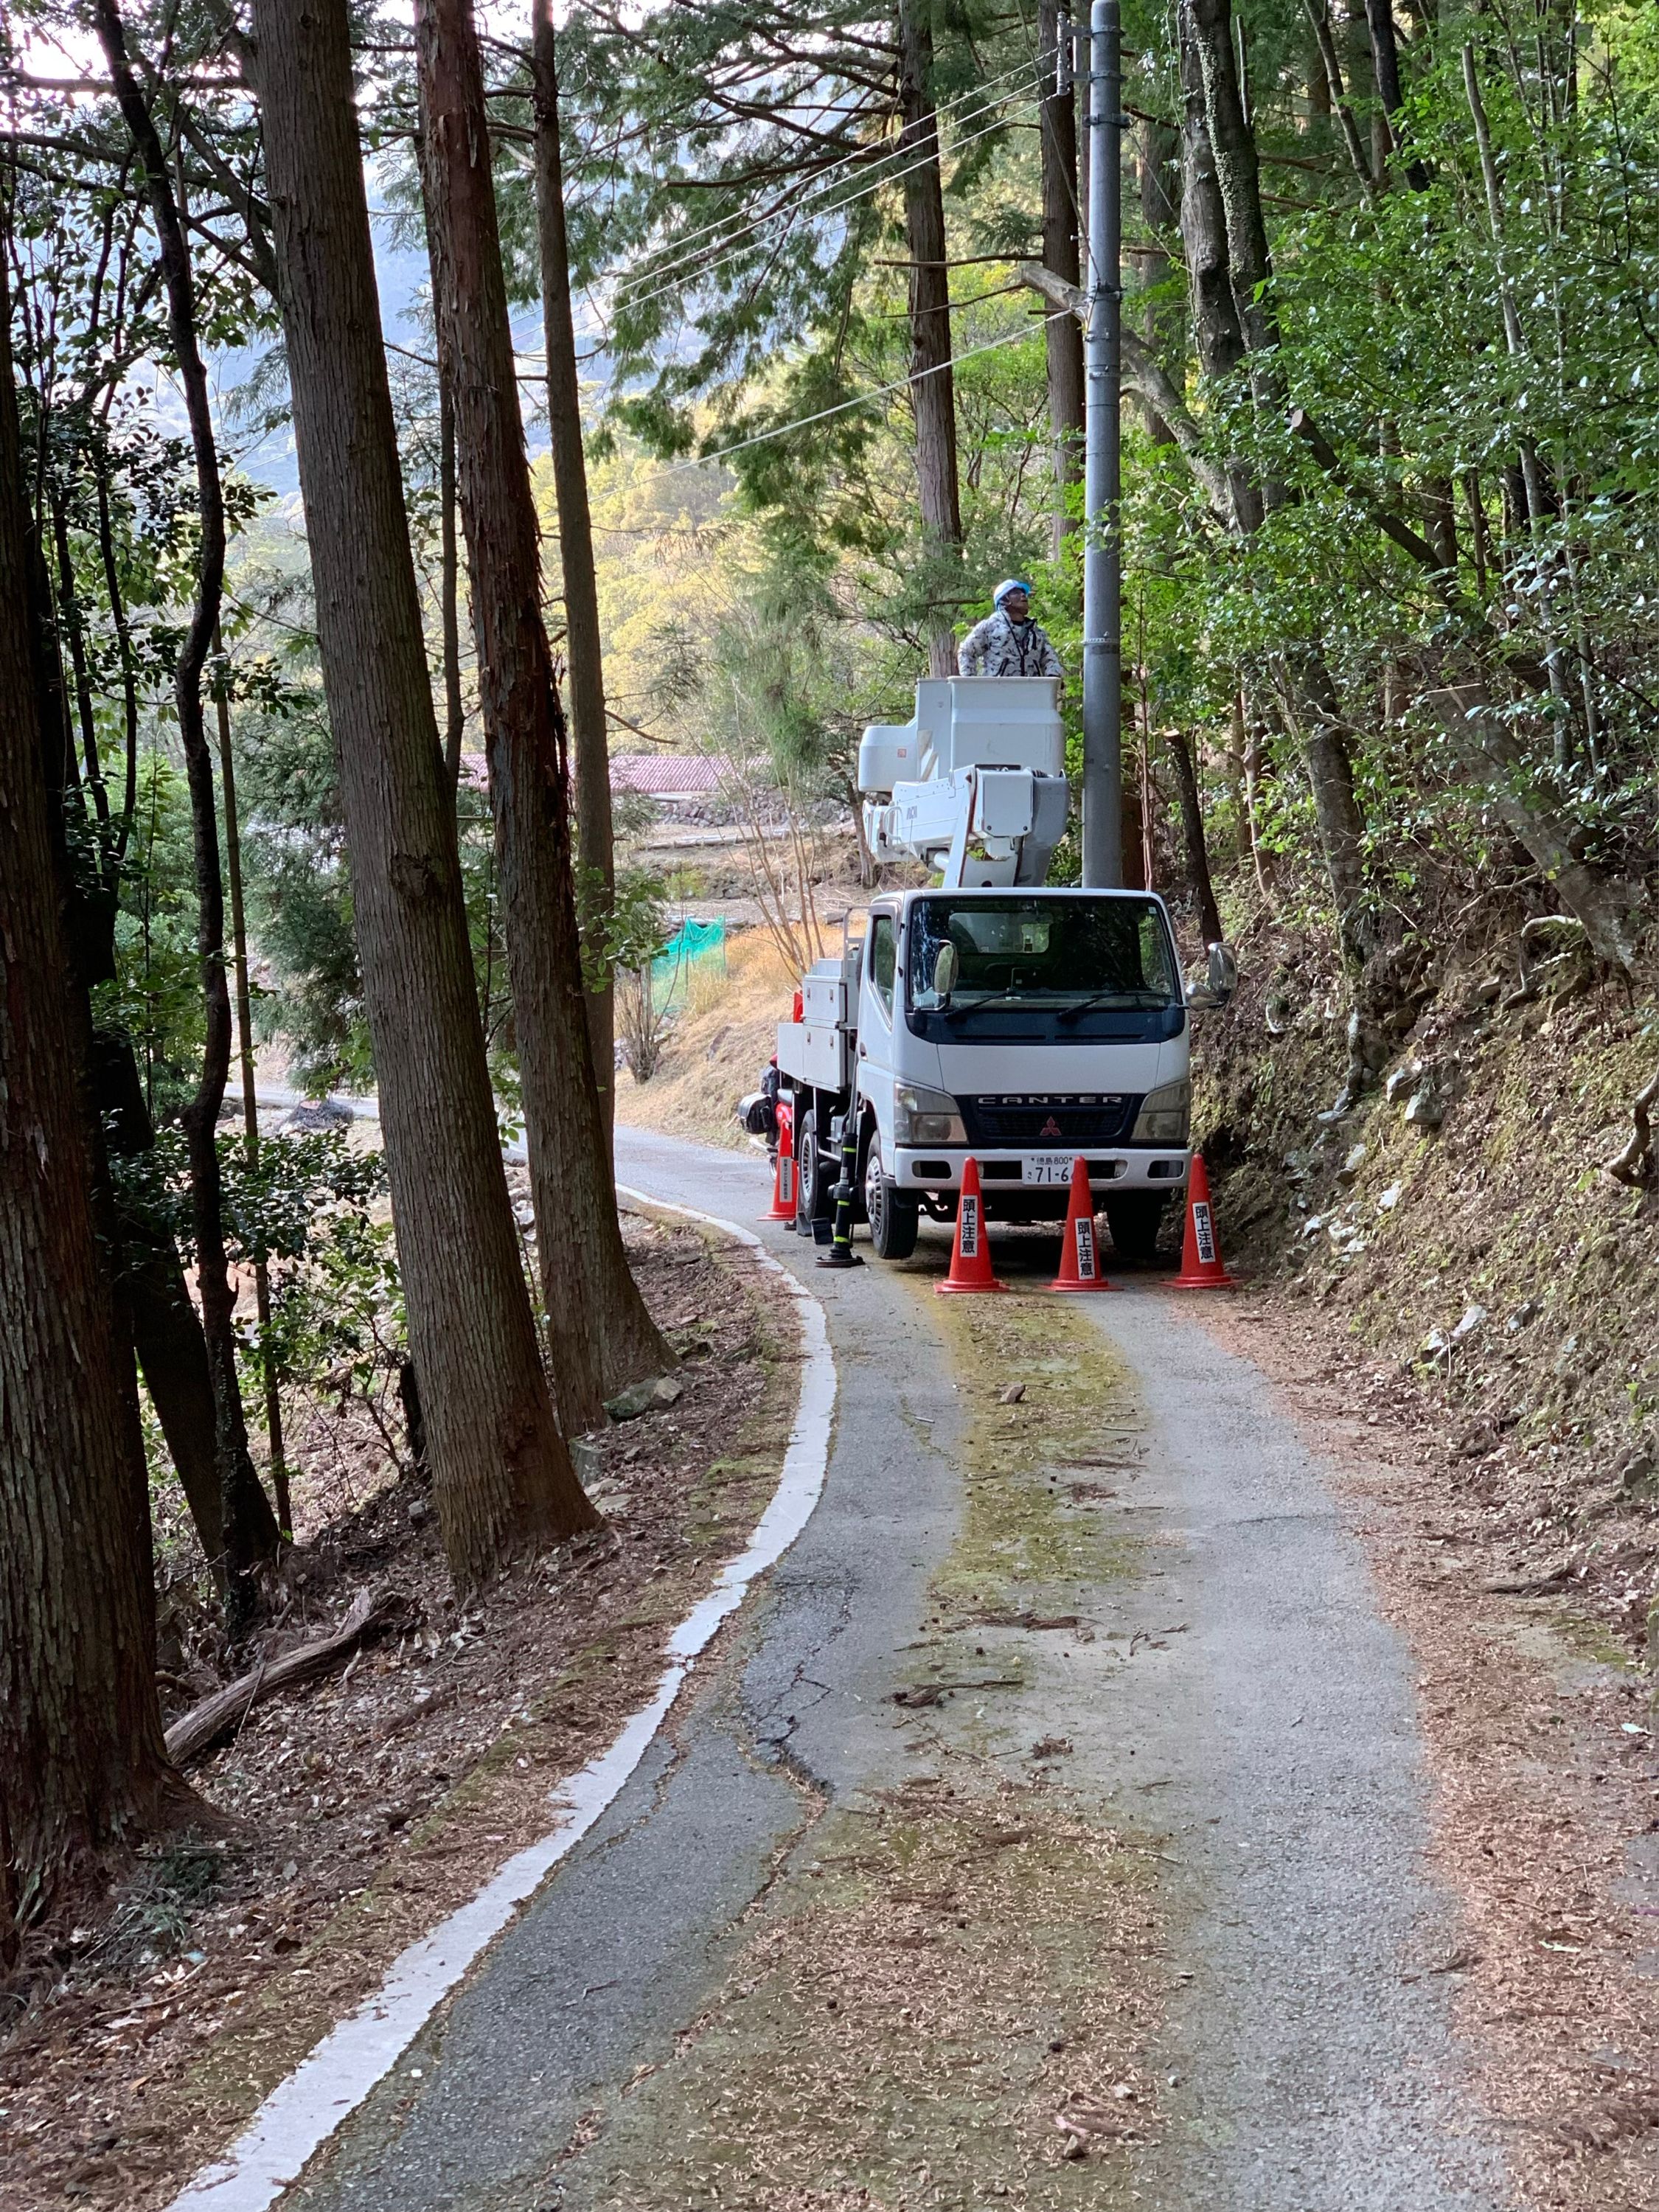 A small truck used by a crew of electricians blocks the entire width of a narrow country road.